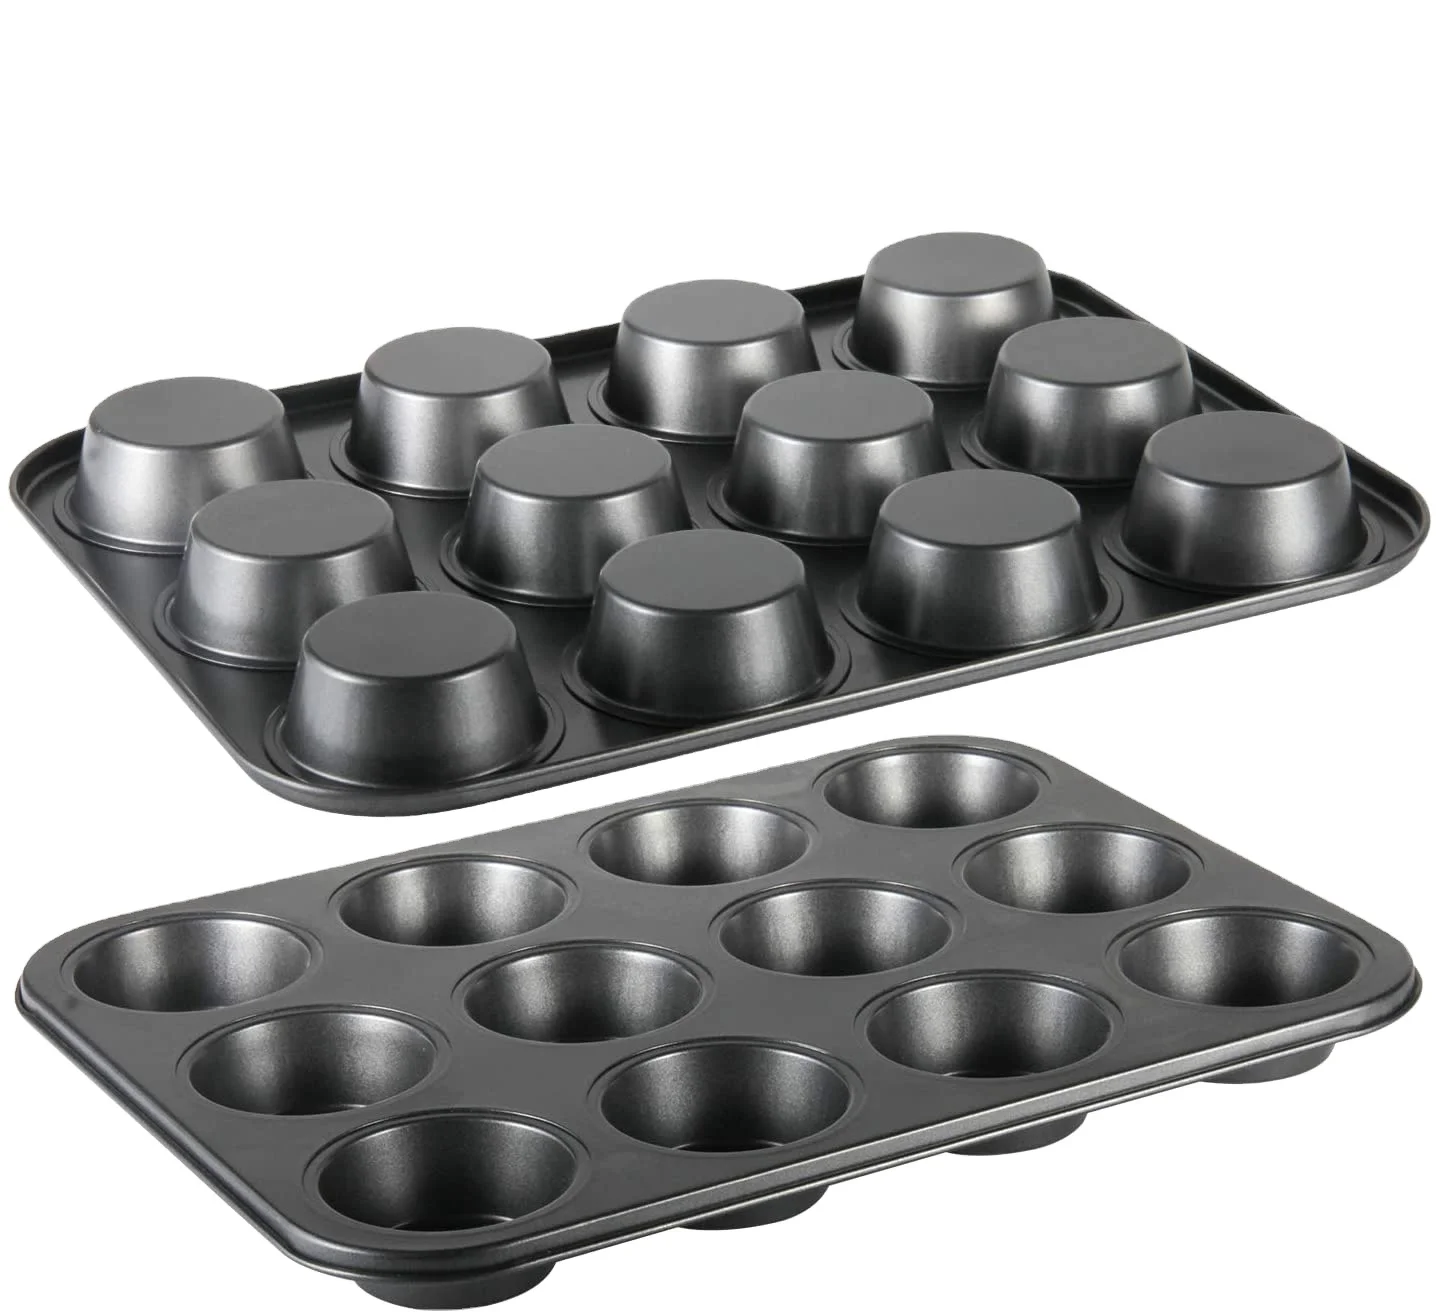 

WIDENY Carbon Steel Non-Stick Custom Black Bakeware 12 Cup Muffin Pan,Non Stick Square Christmas Cupcake Baking Tray for Oven, Black or brown